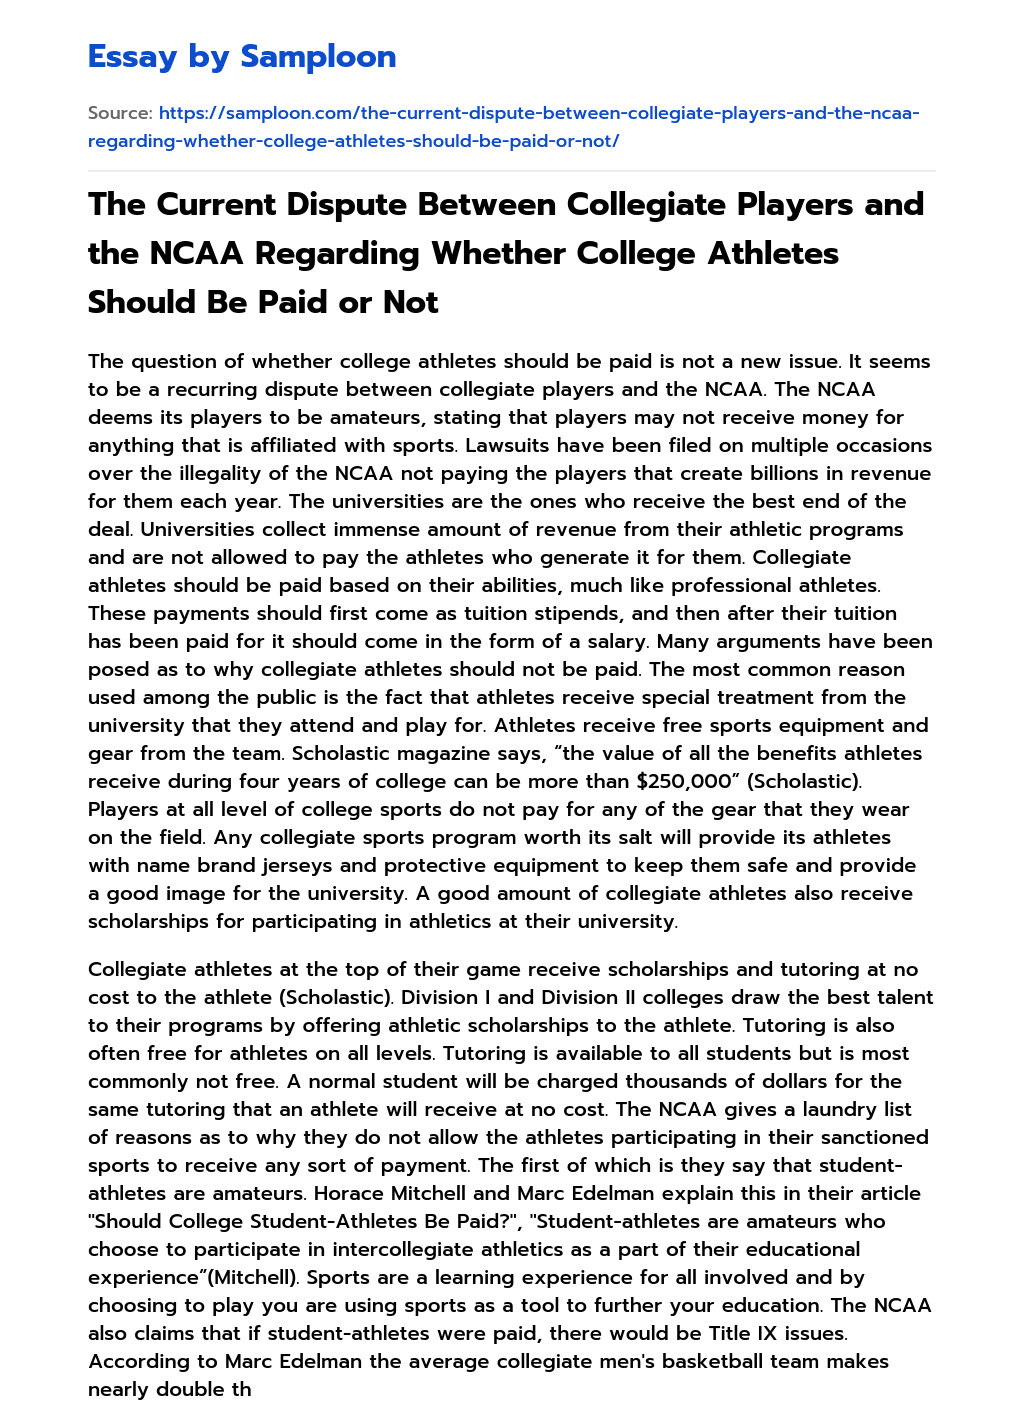 The Current Dispute Between Collegiate Players and the NCAA Regarding Whether College Athletes Should Be Paid or Not essay